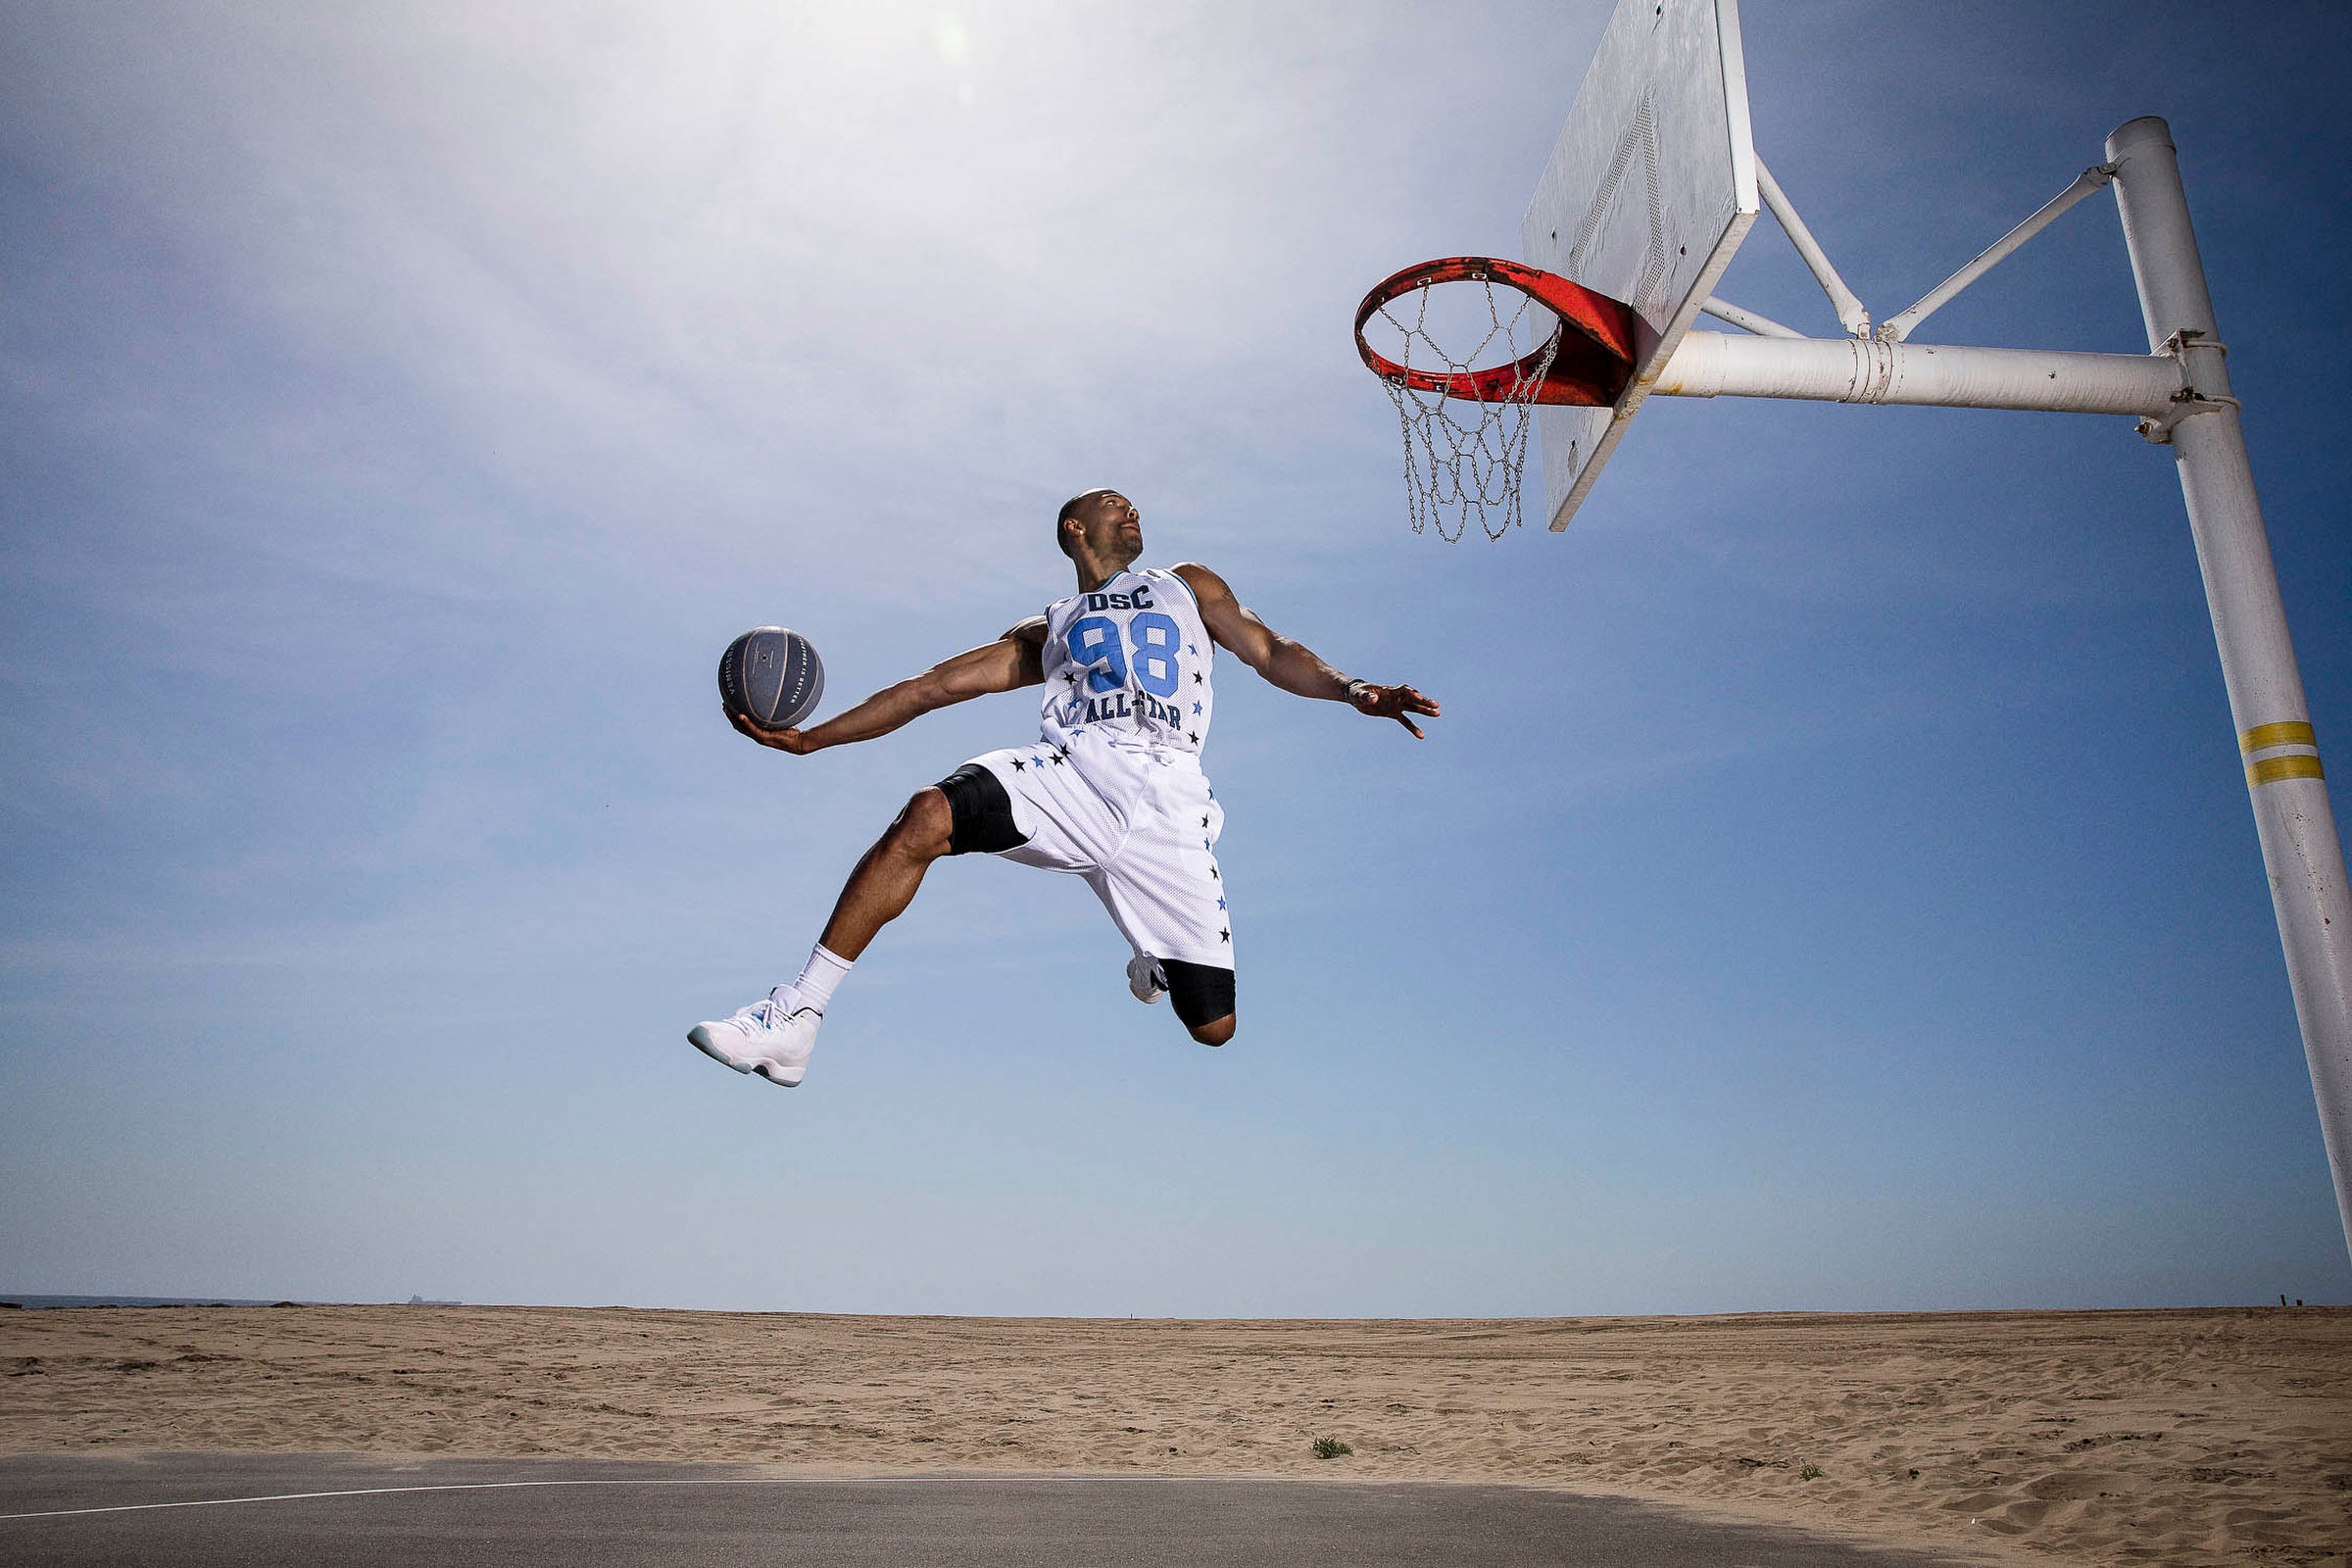 An epic photo of a man dunking a basketball against a blue sky.